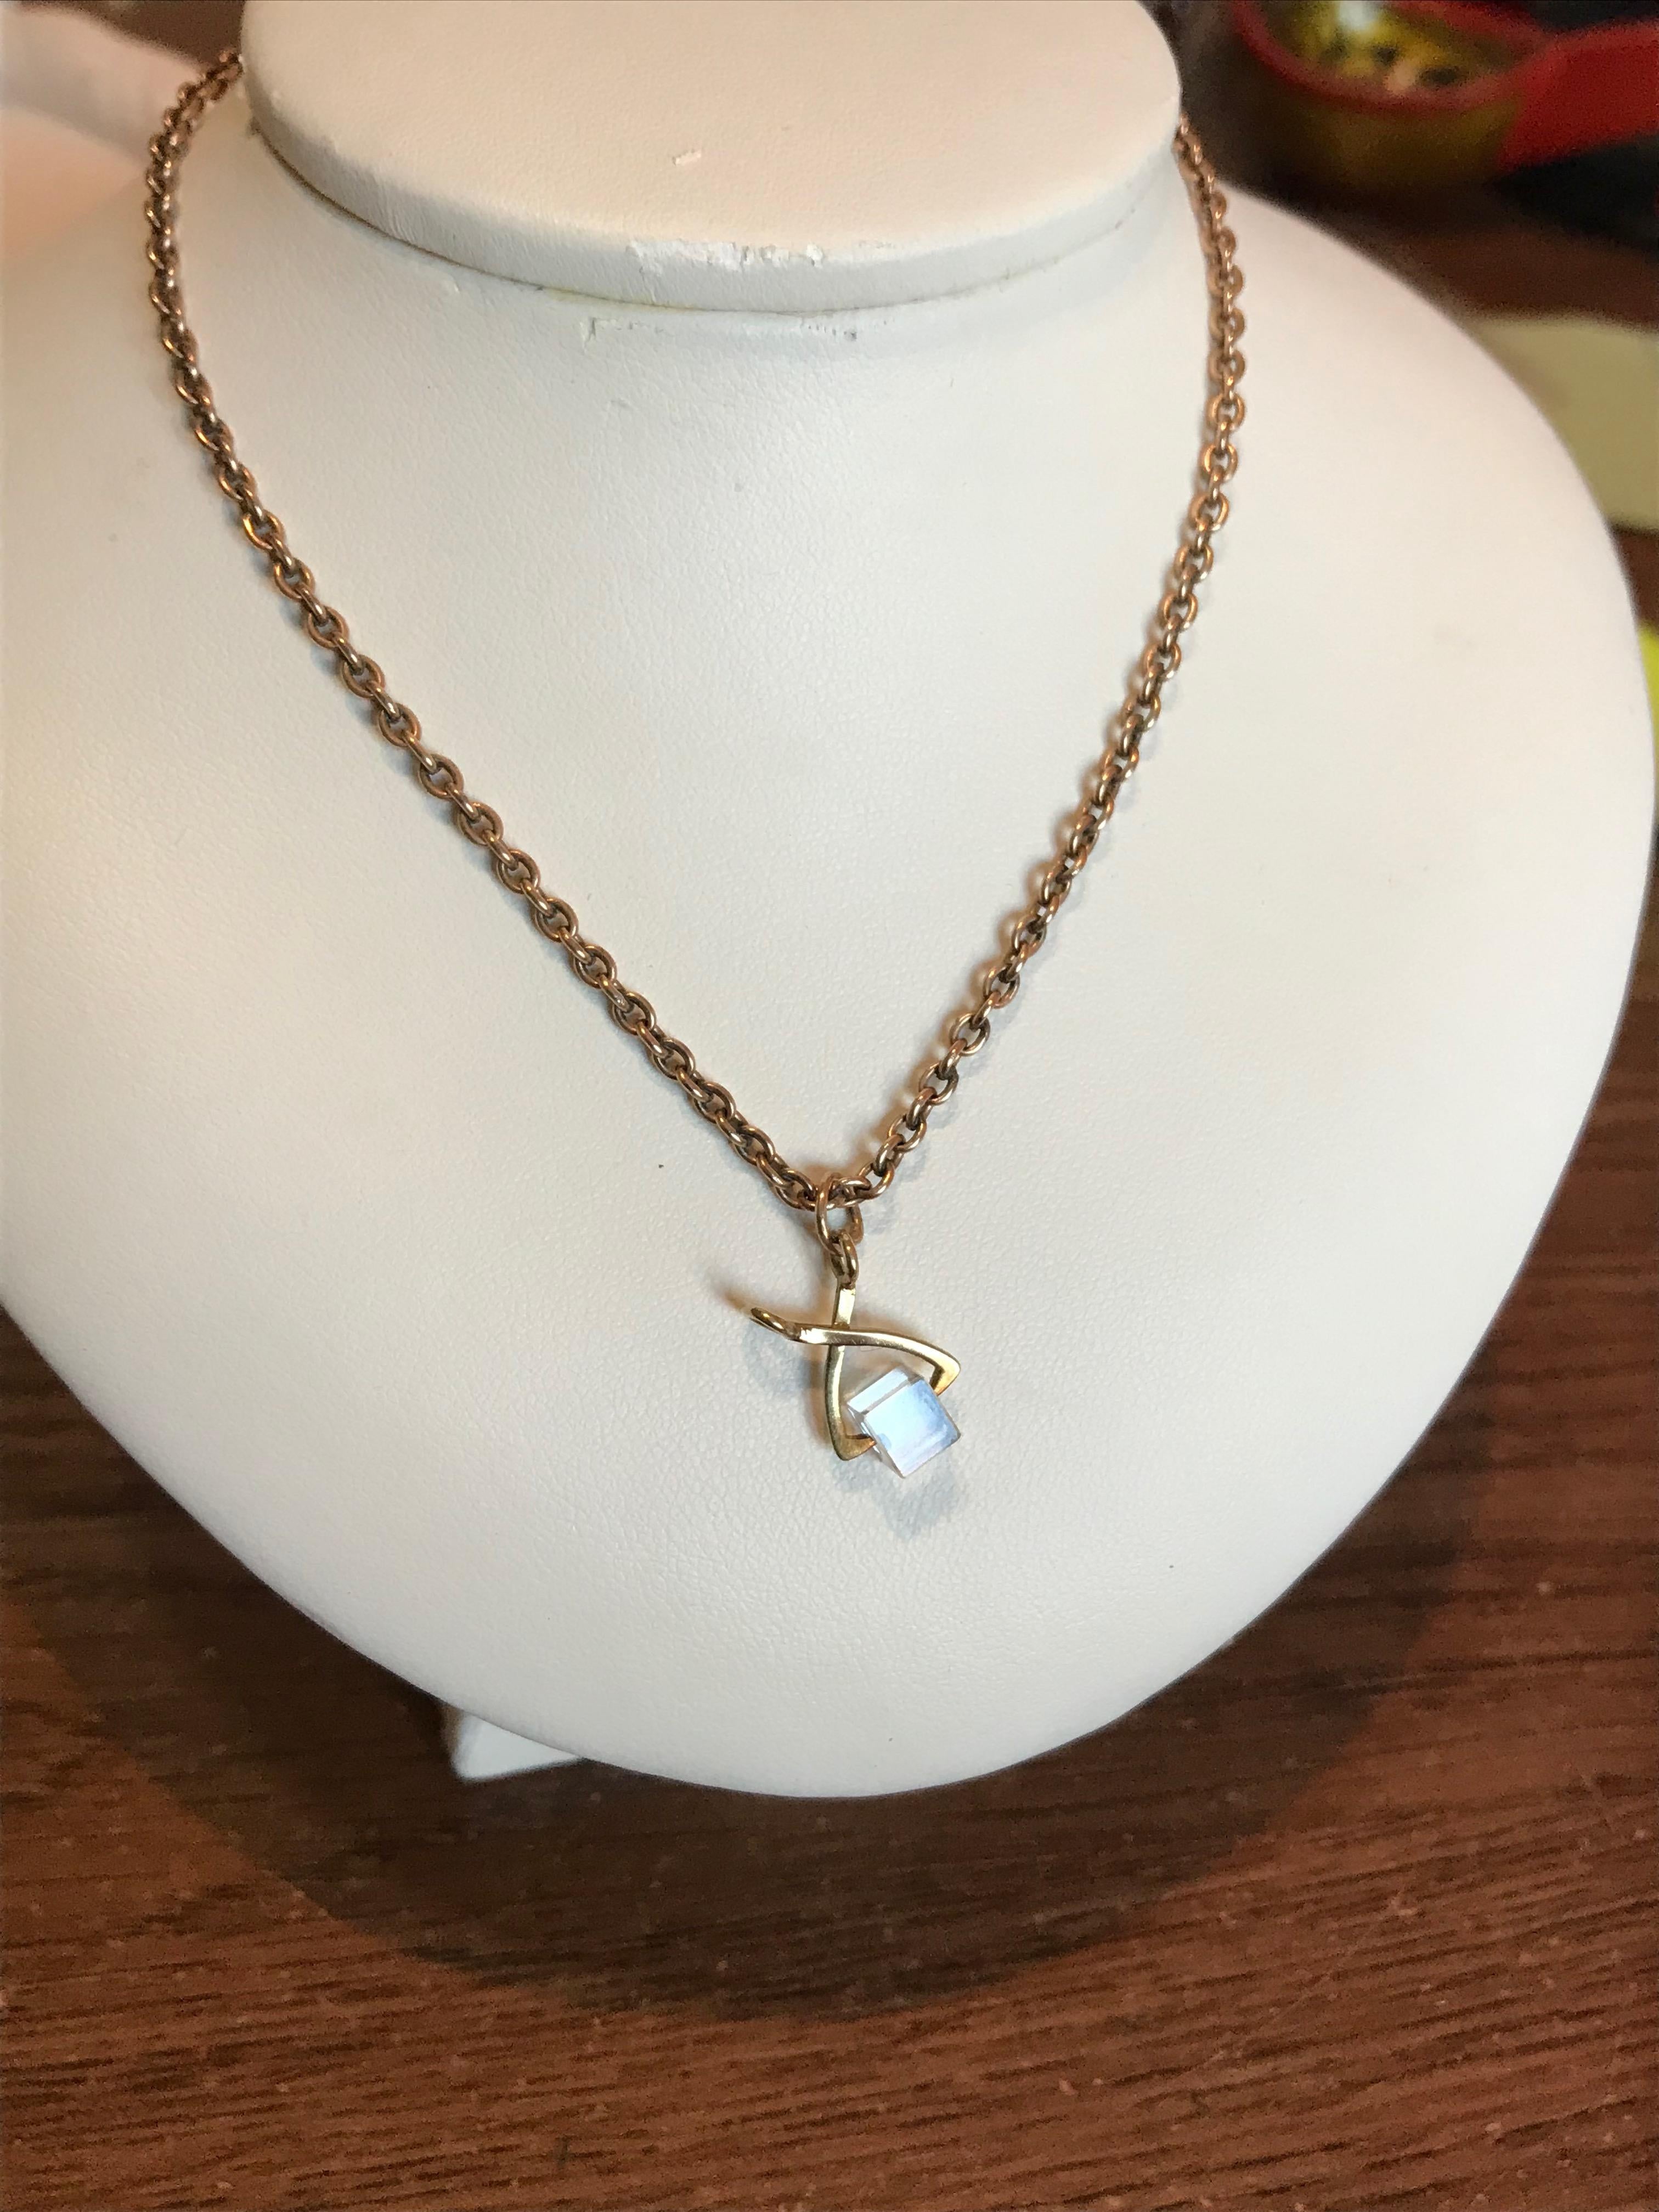 Designed as a pair of tiny 14k rose gold ice tongs in the form of scissors clutching a swiveling plexiglass ice cube, attached to a gold suspension ring.  May be worn on a bracelet or on a gold chain as pictured. 

1950s

3/4 in. (1.9 cm) long